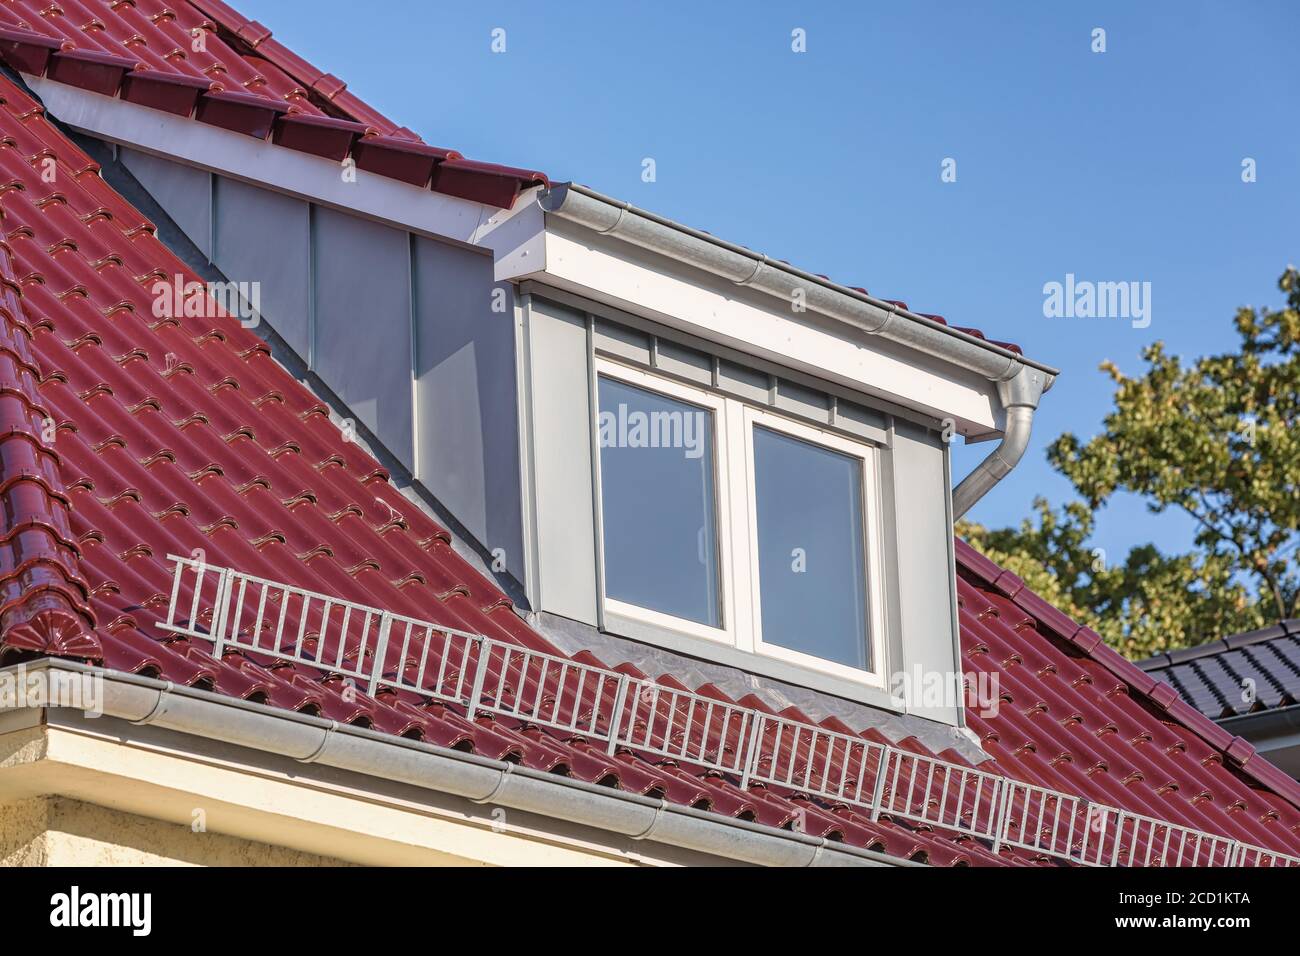 zinc dormer on red roof Stock Photo